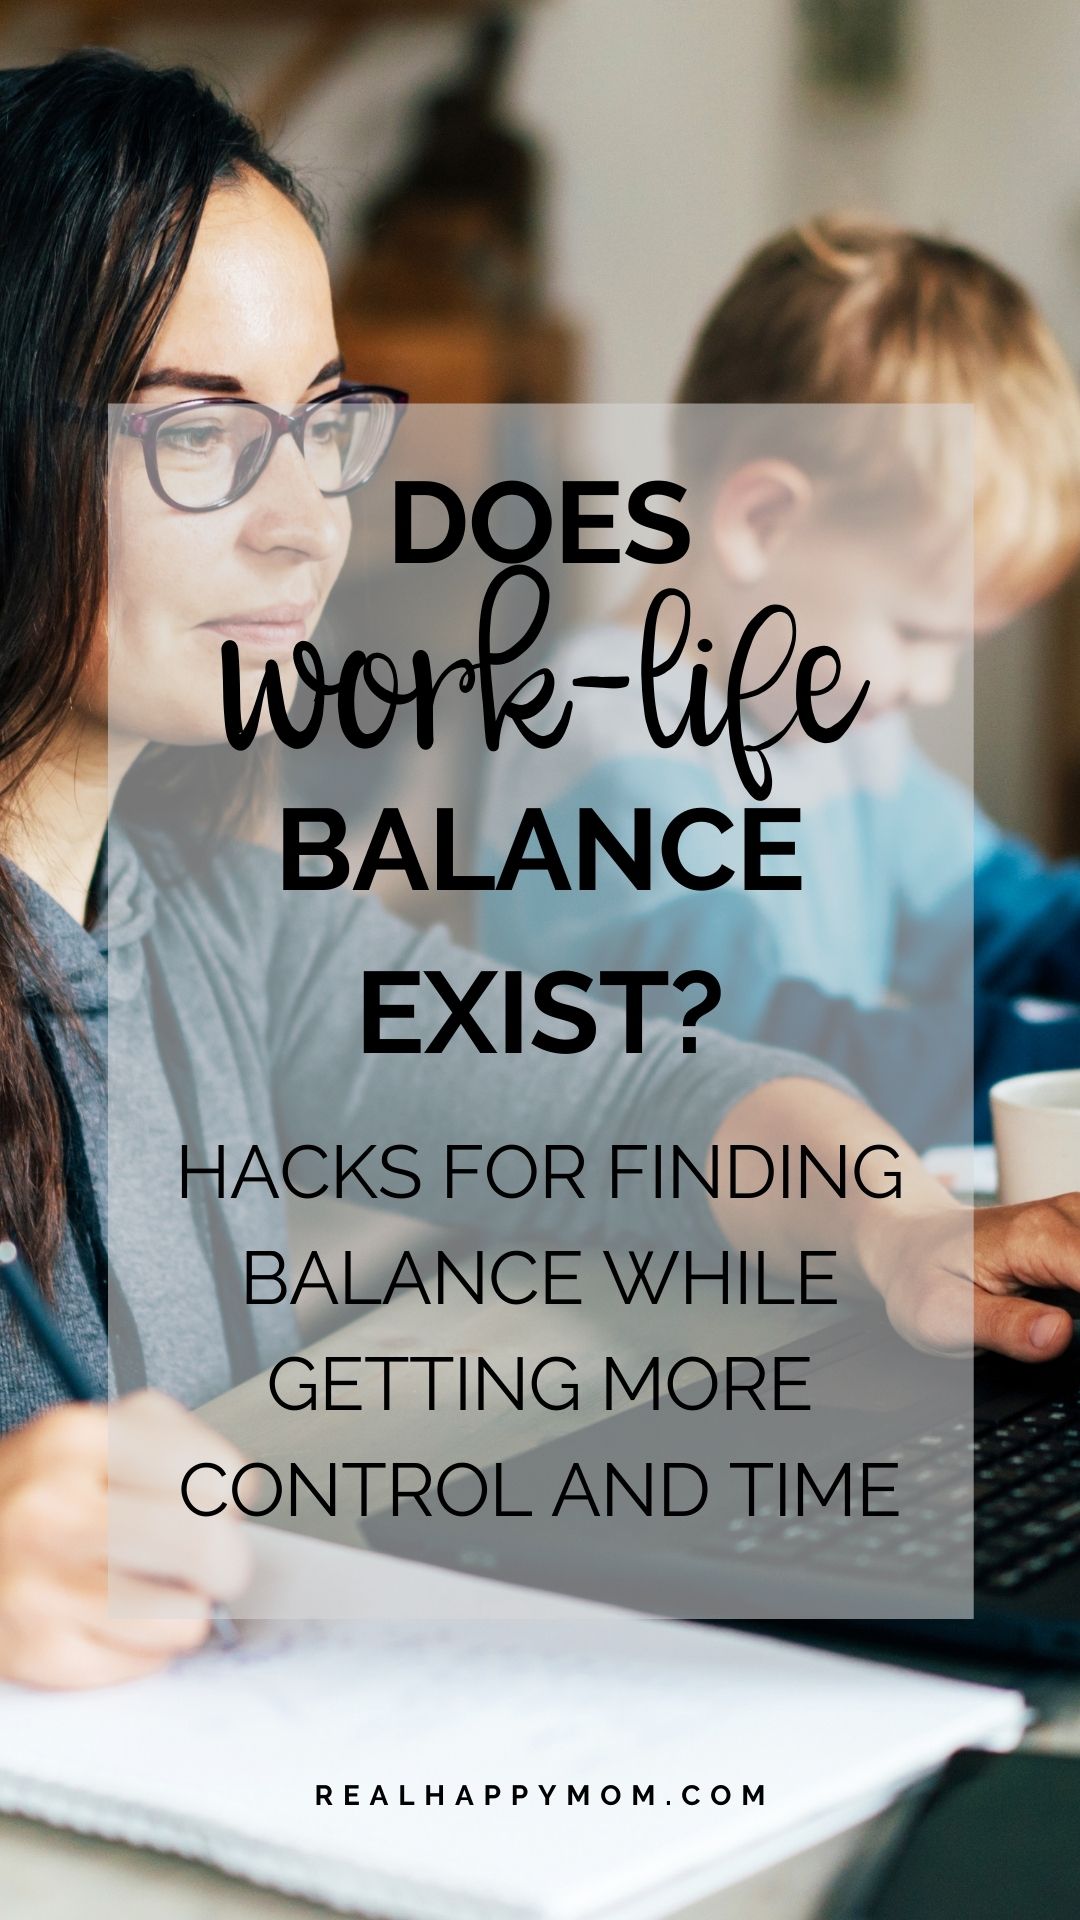 Does Work-Life Balance Exist? Hacks for Finding Balance While Getting More Control and Time